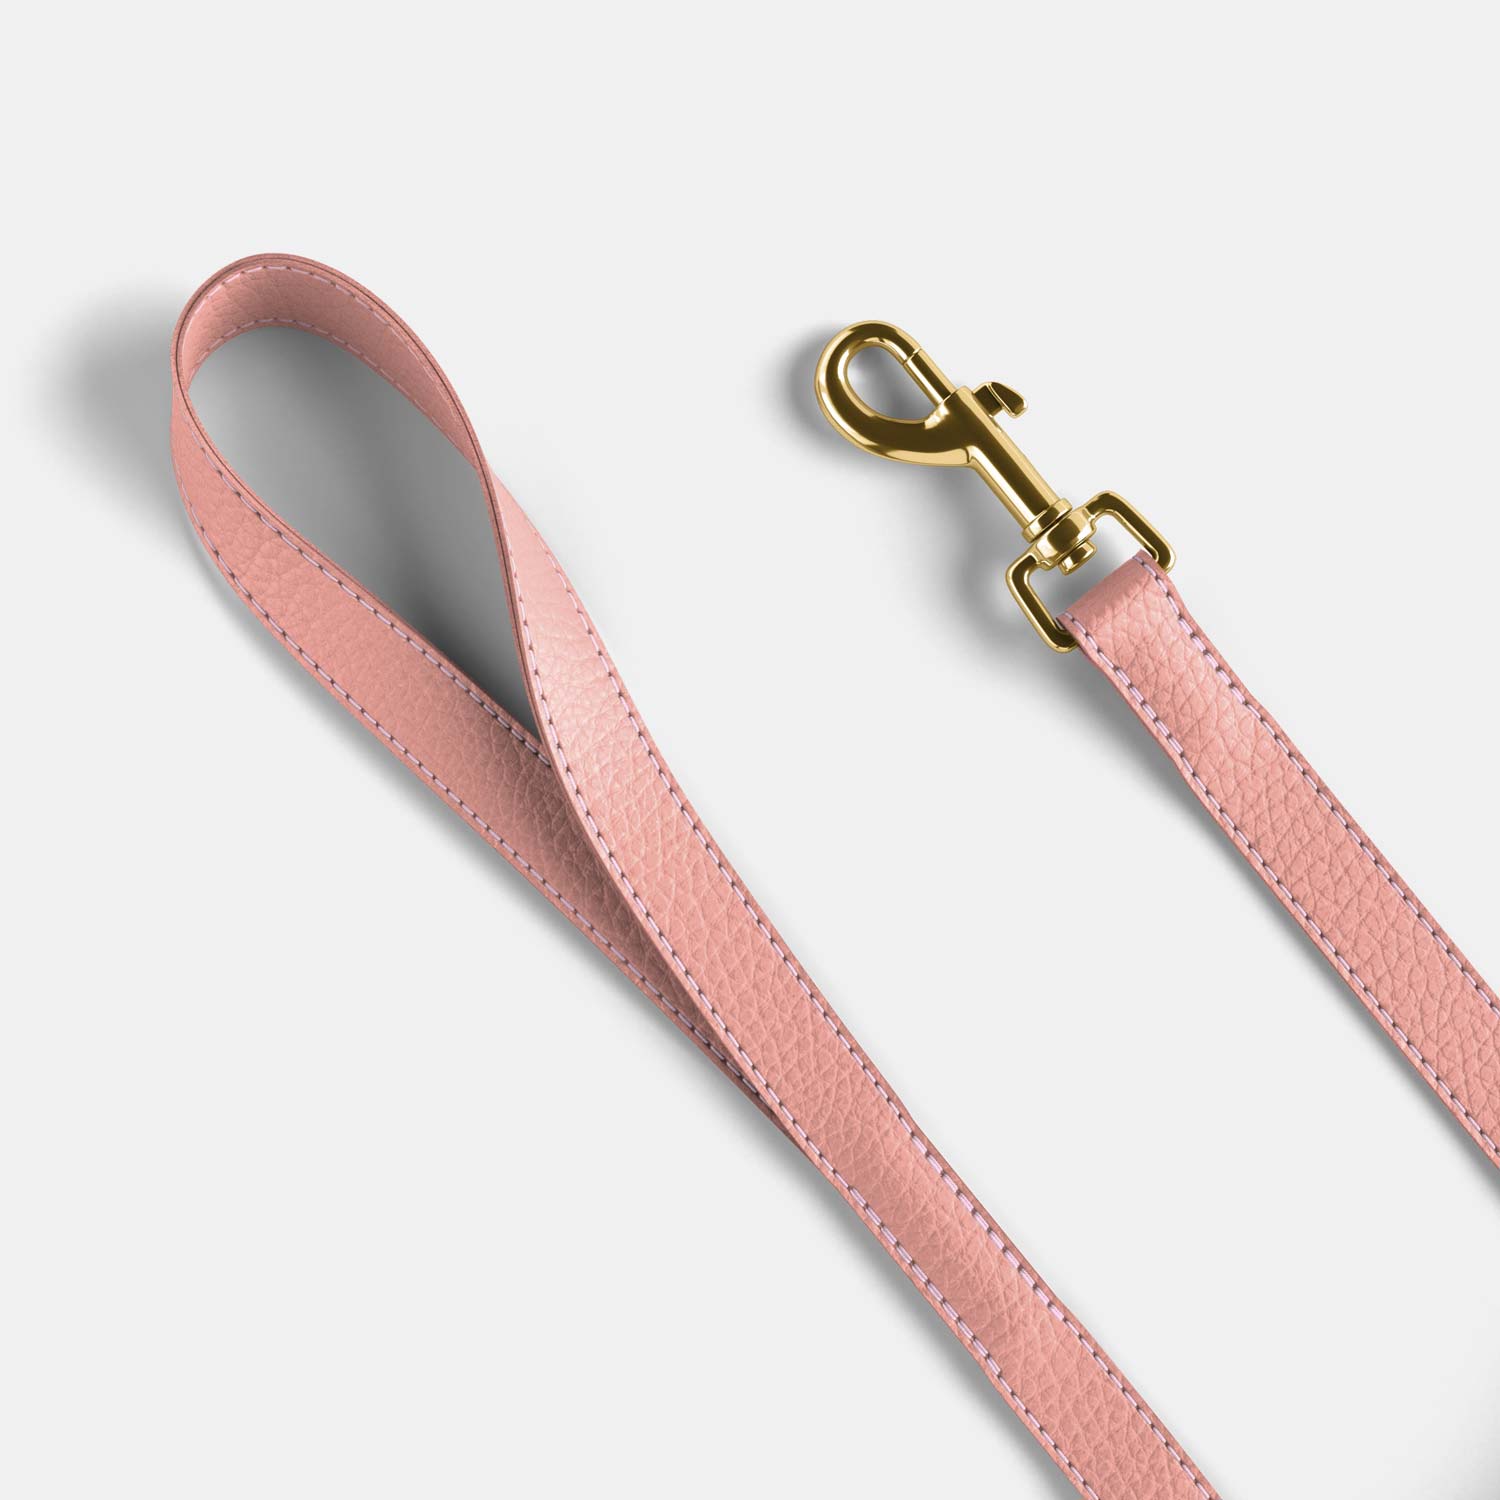 Leather Dog Leash - Purple and Pink